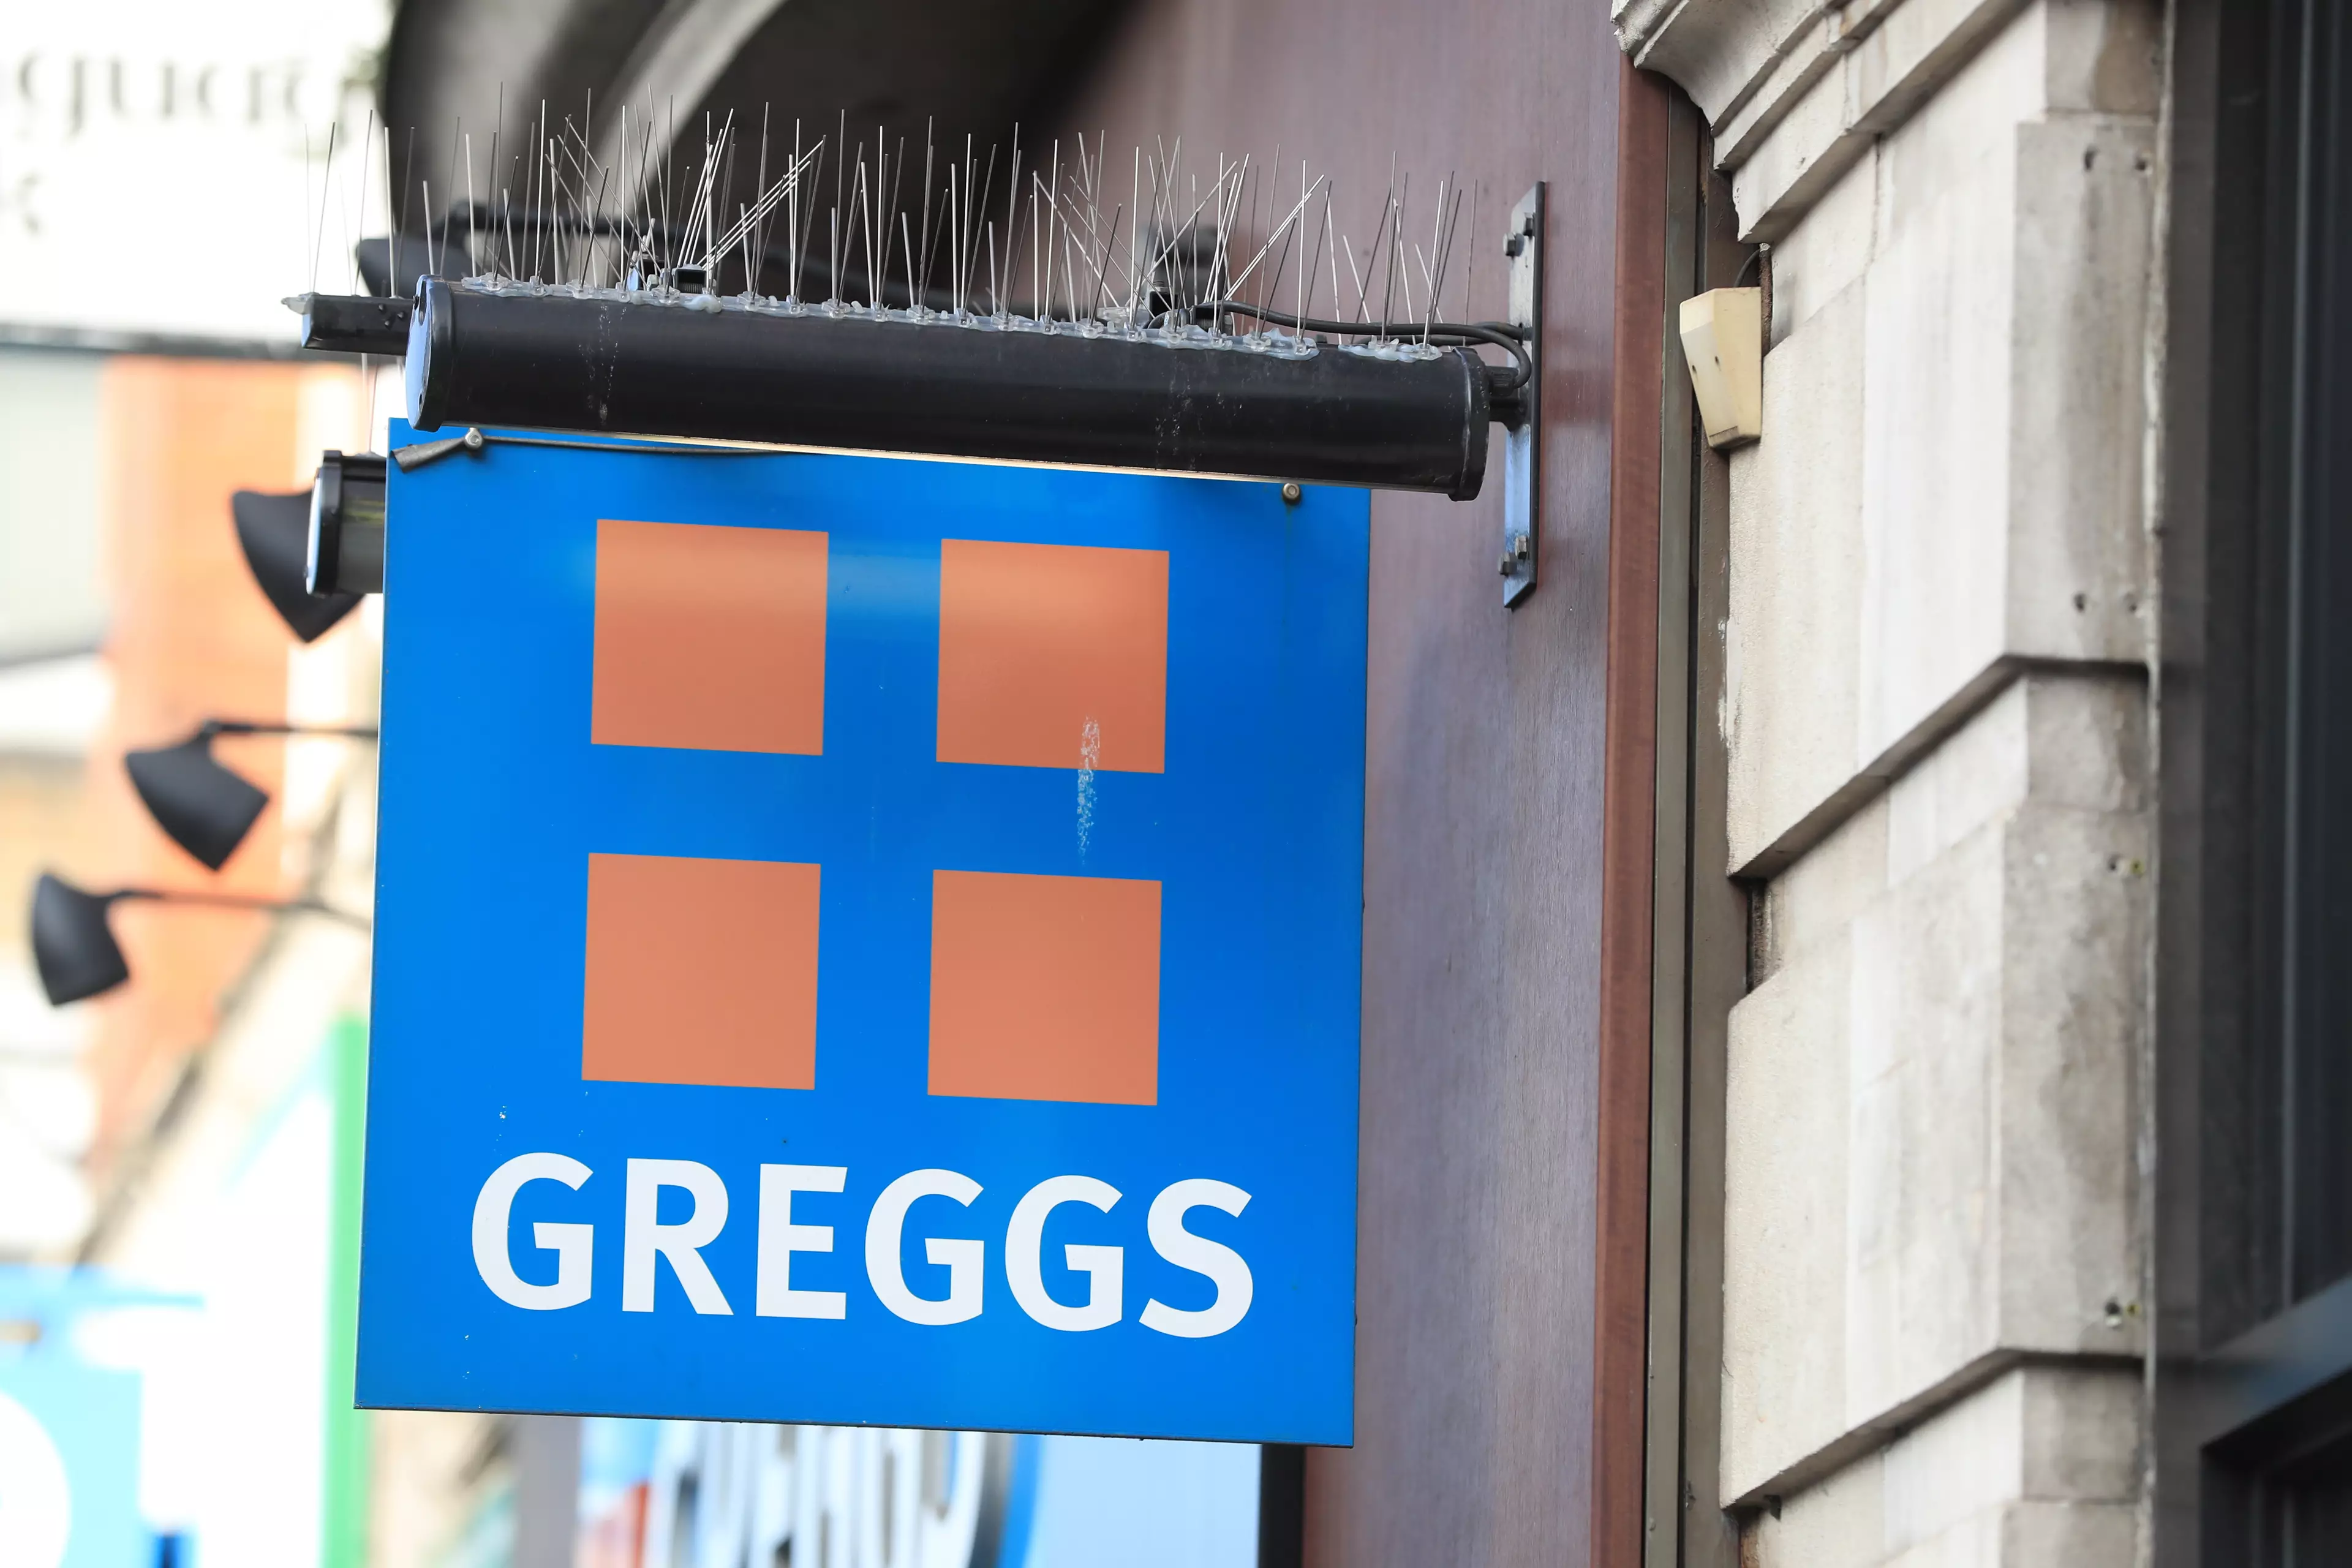 Asda is set to become the first UK supermarket with a Greggs counter.